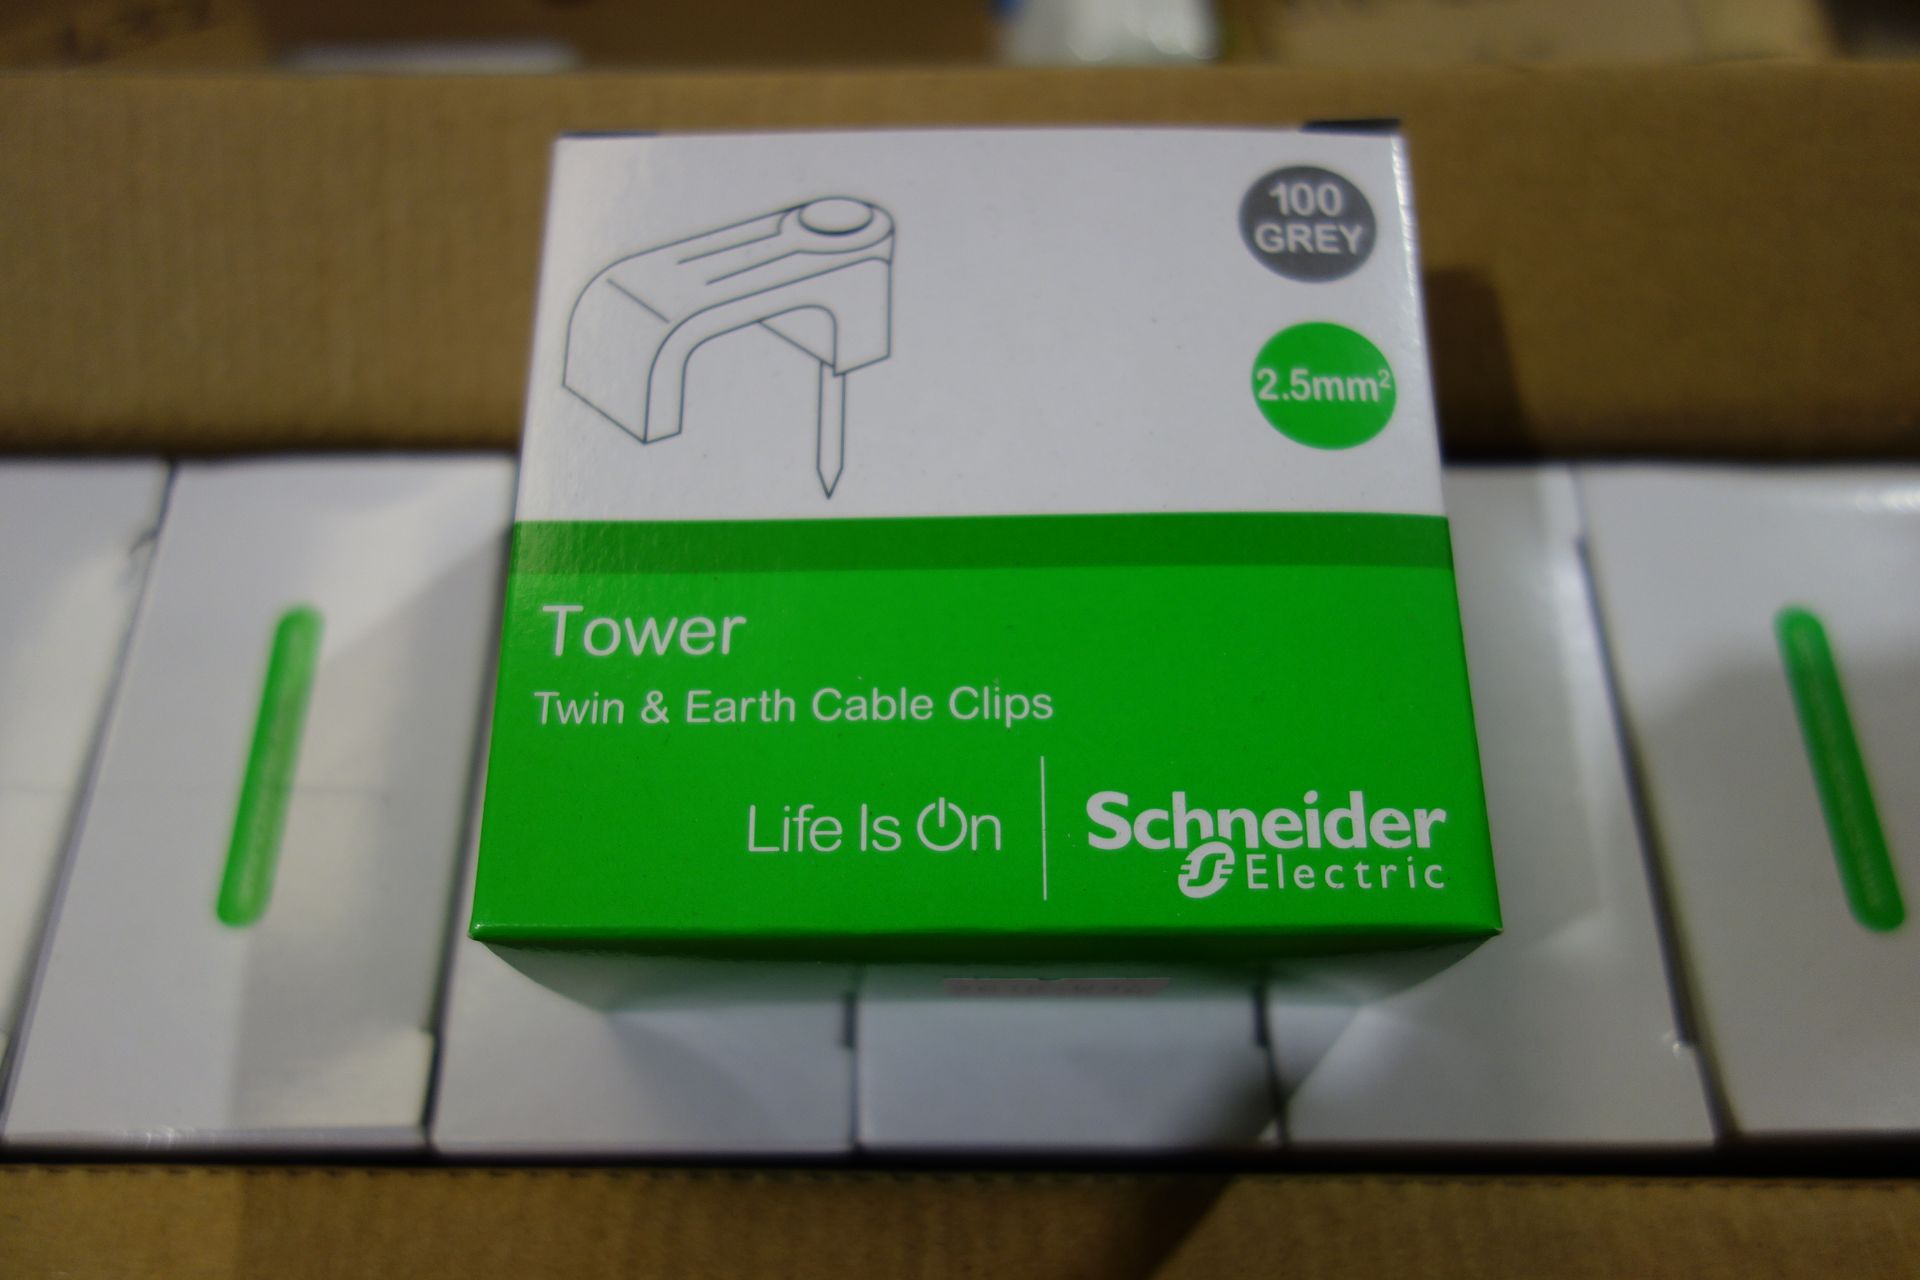 160x Pack of Schneider 1MT22010 1.5mm Twin + Earth Cable Clips, Grey. 100 Clips per box.